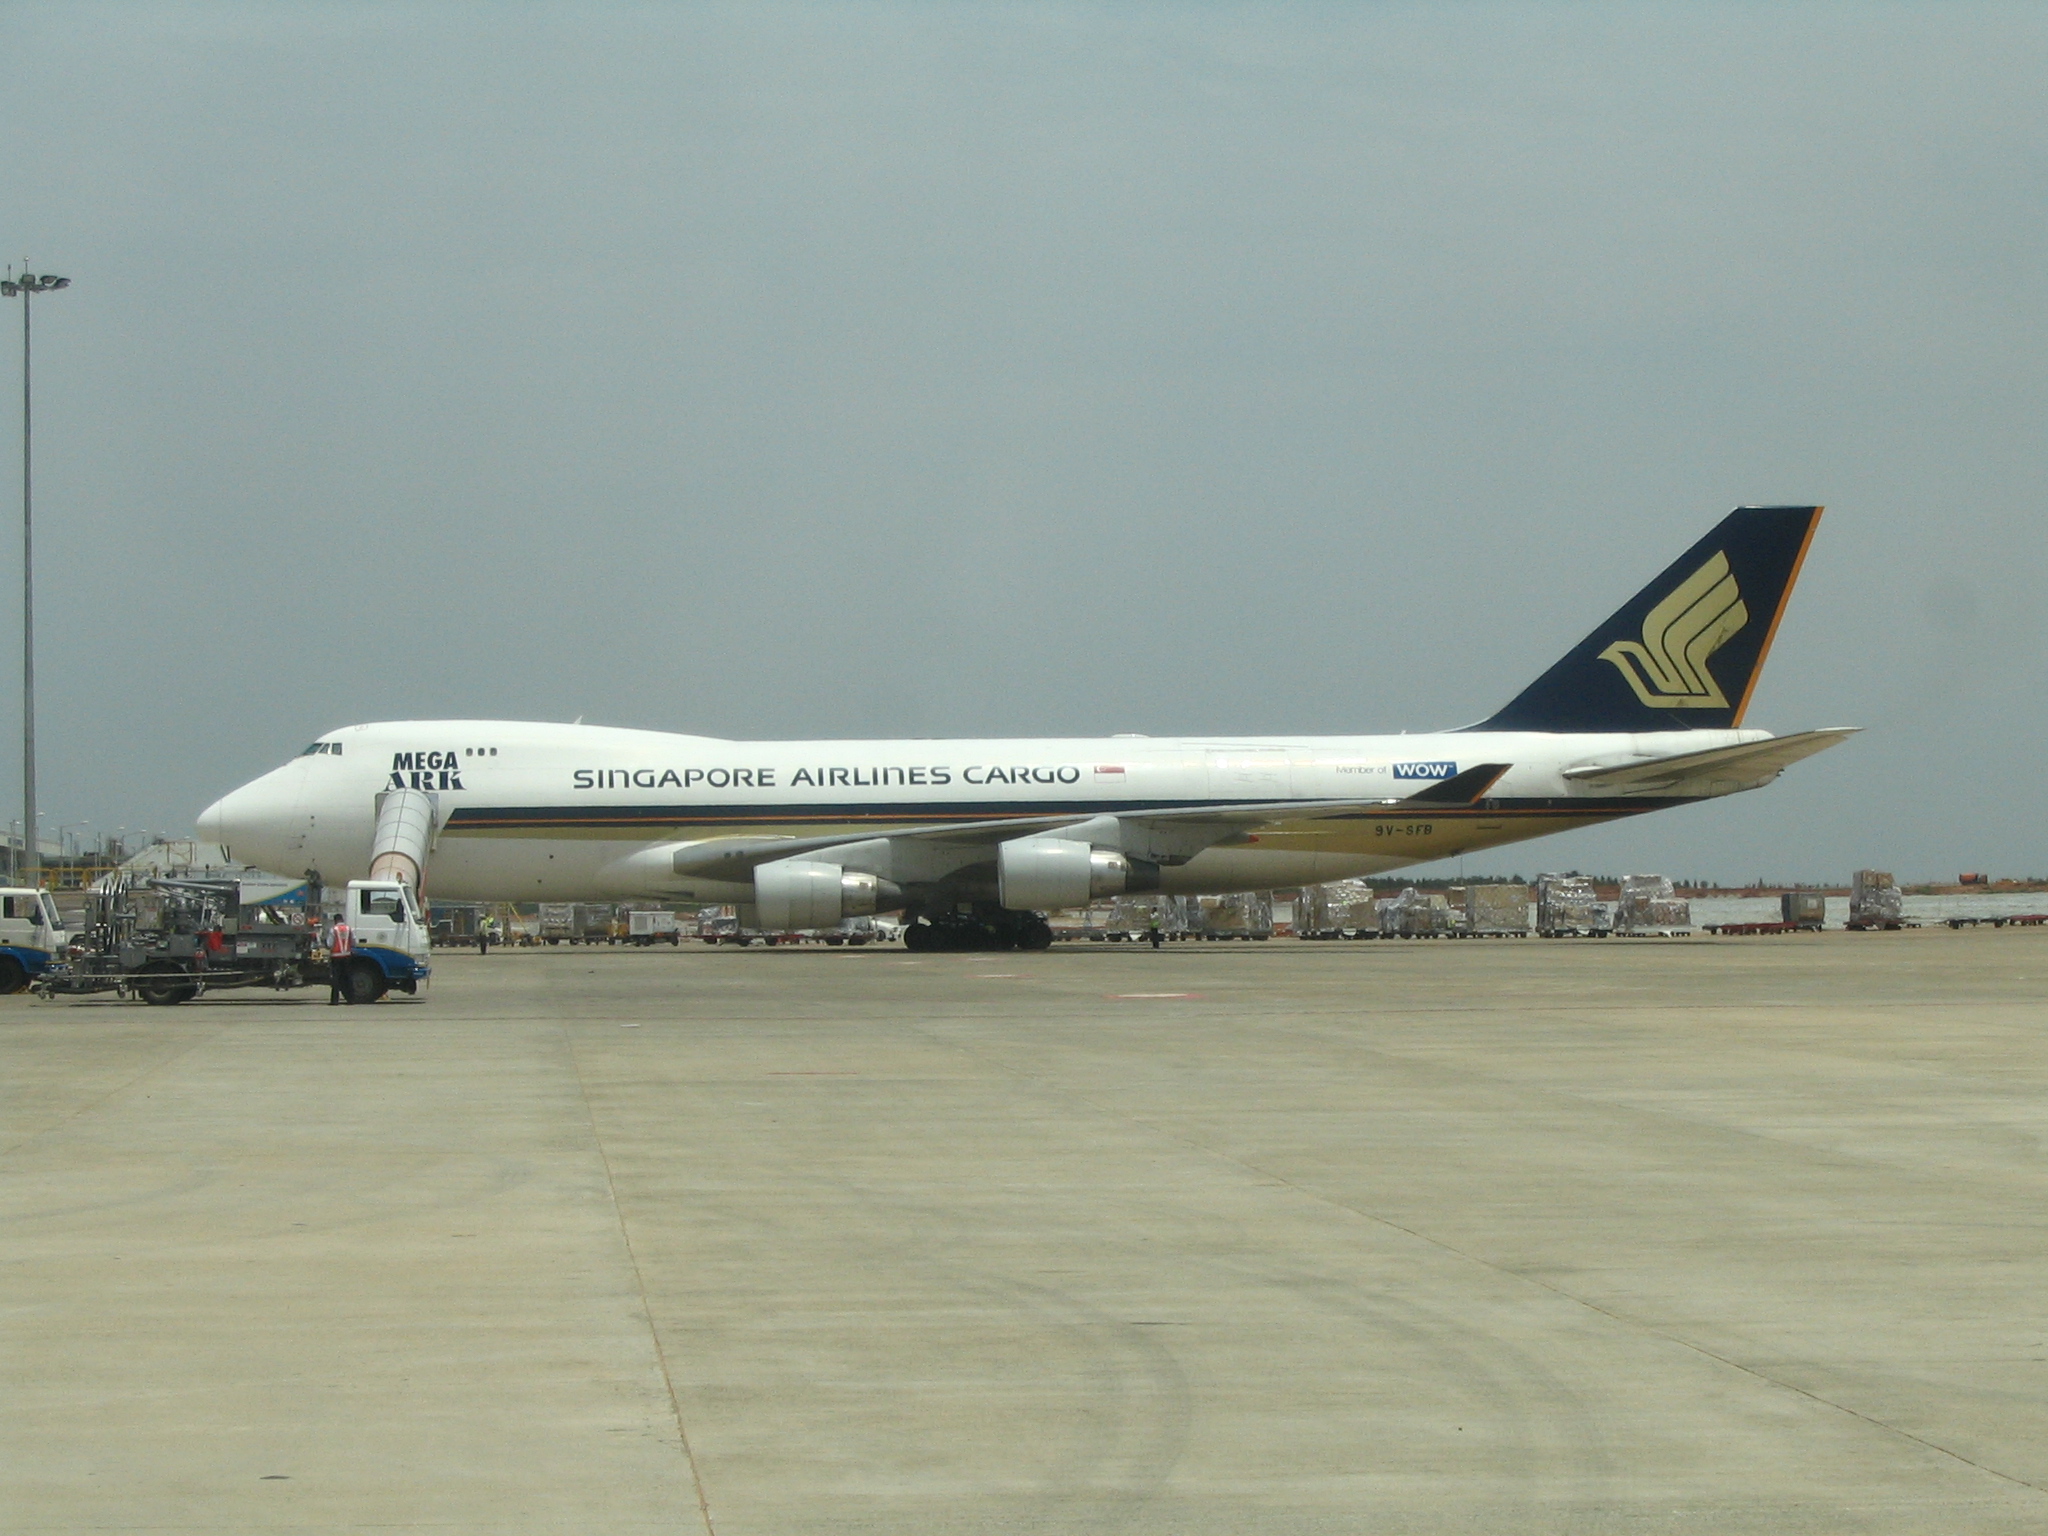 BIAL Singapore Airlines cargo B 747